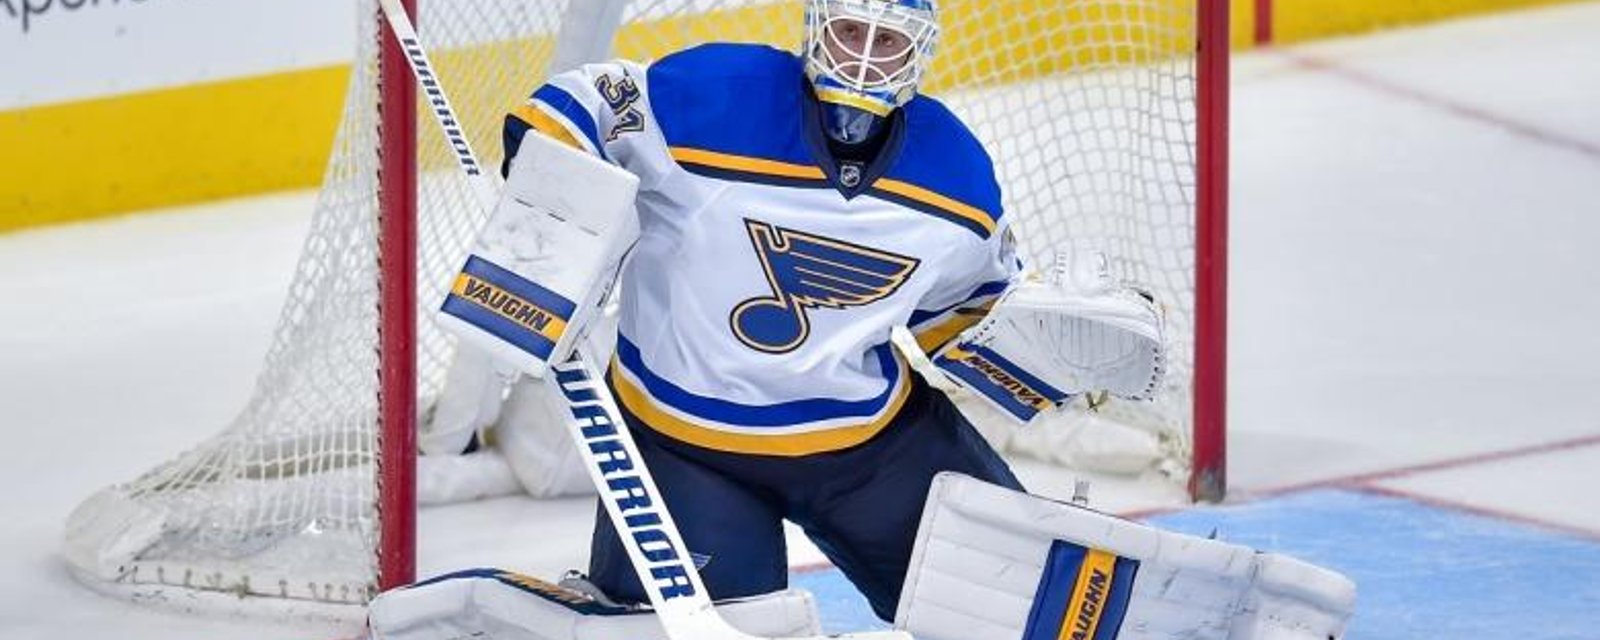 Breaking: Blues lose two big players for regular season, maybe more.